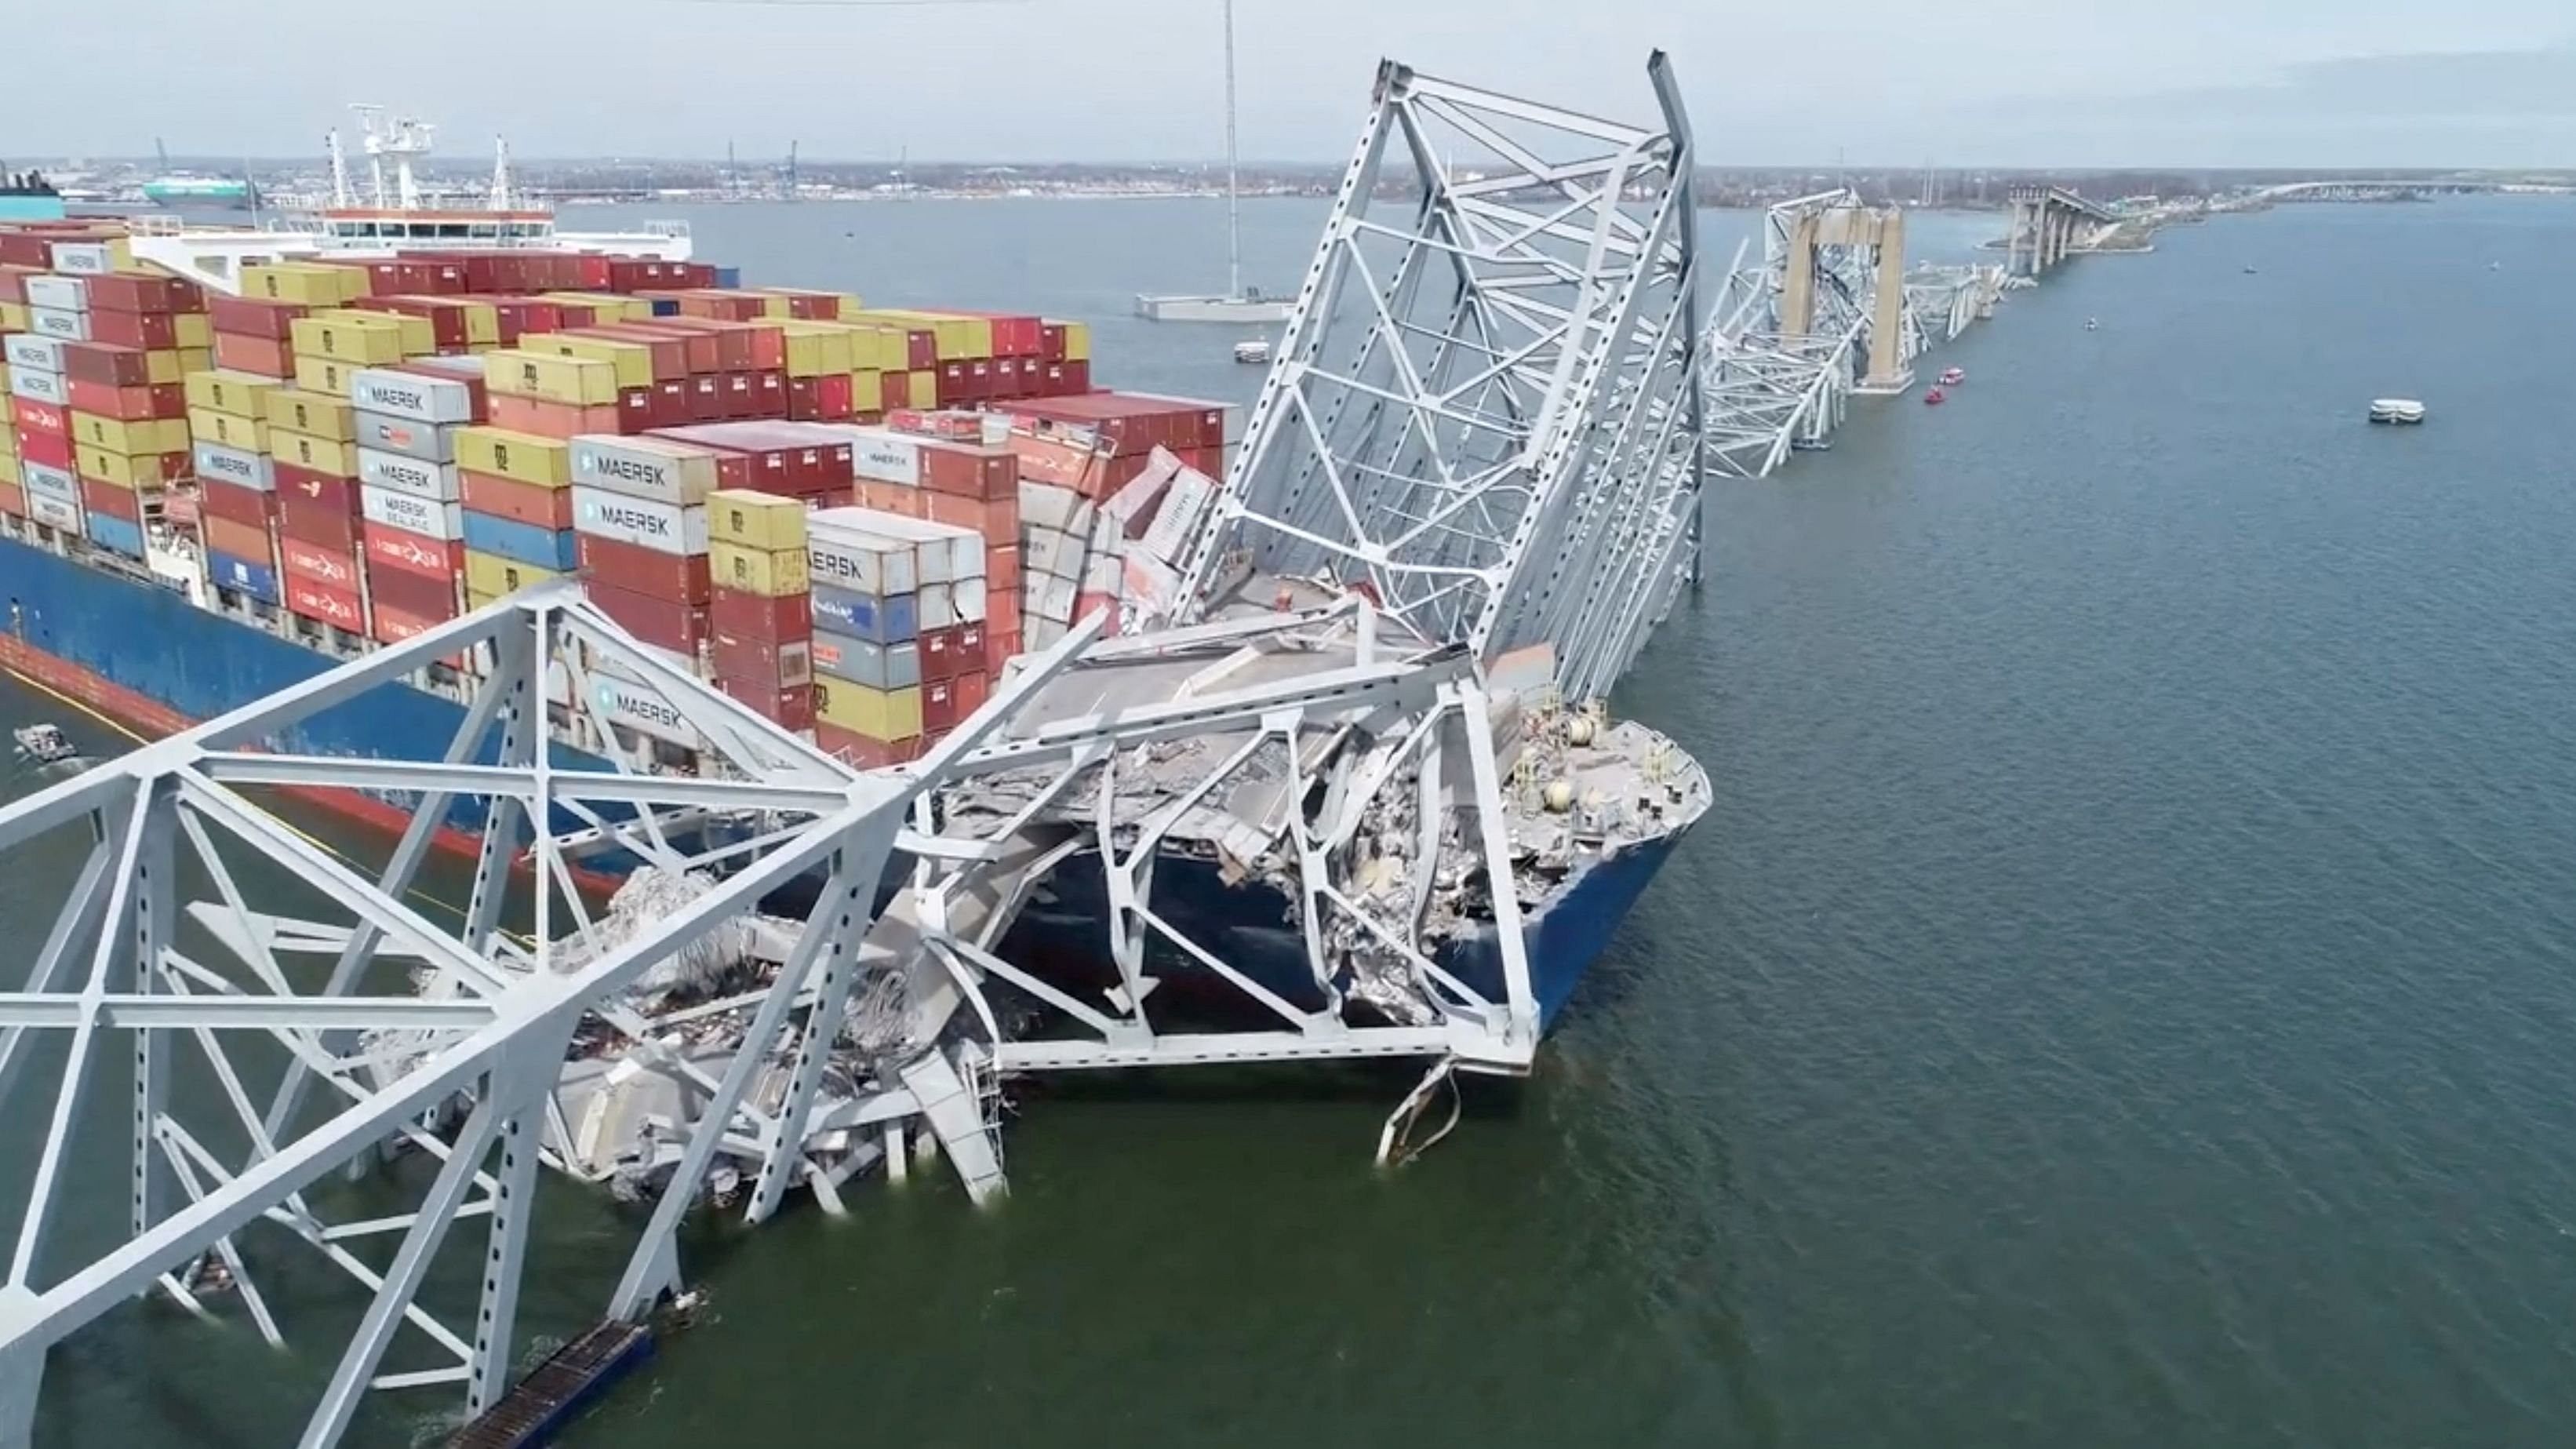 <div class="paragraphs"><p>A drone view of the Dali cargo vessel, which crashed into the Francis Scott Key Bridge causing it to collapse, in Baltimore, Maryland, US.</p></div>